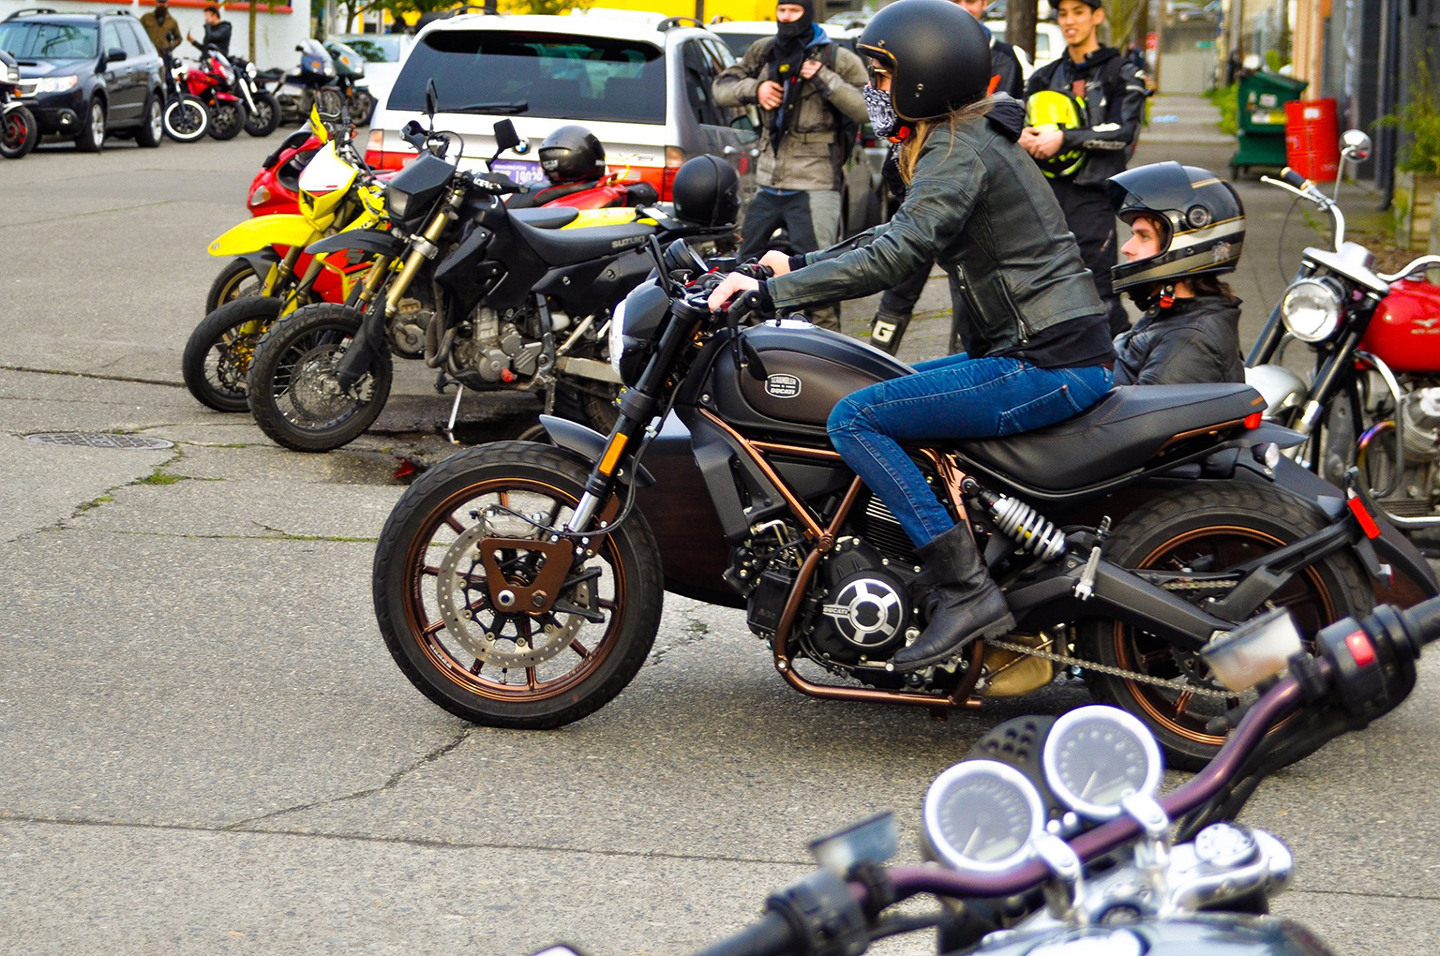 Seattle Motorcycle Trip Guide: 7 Stops in the PNW